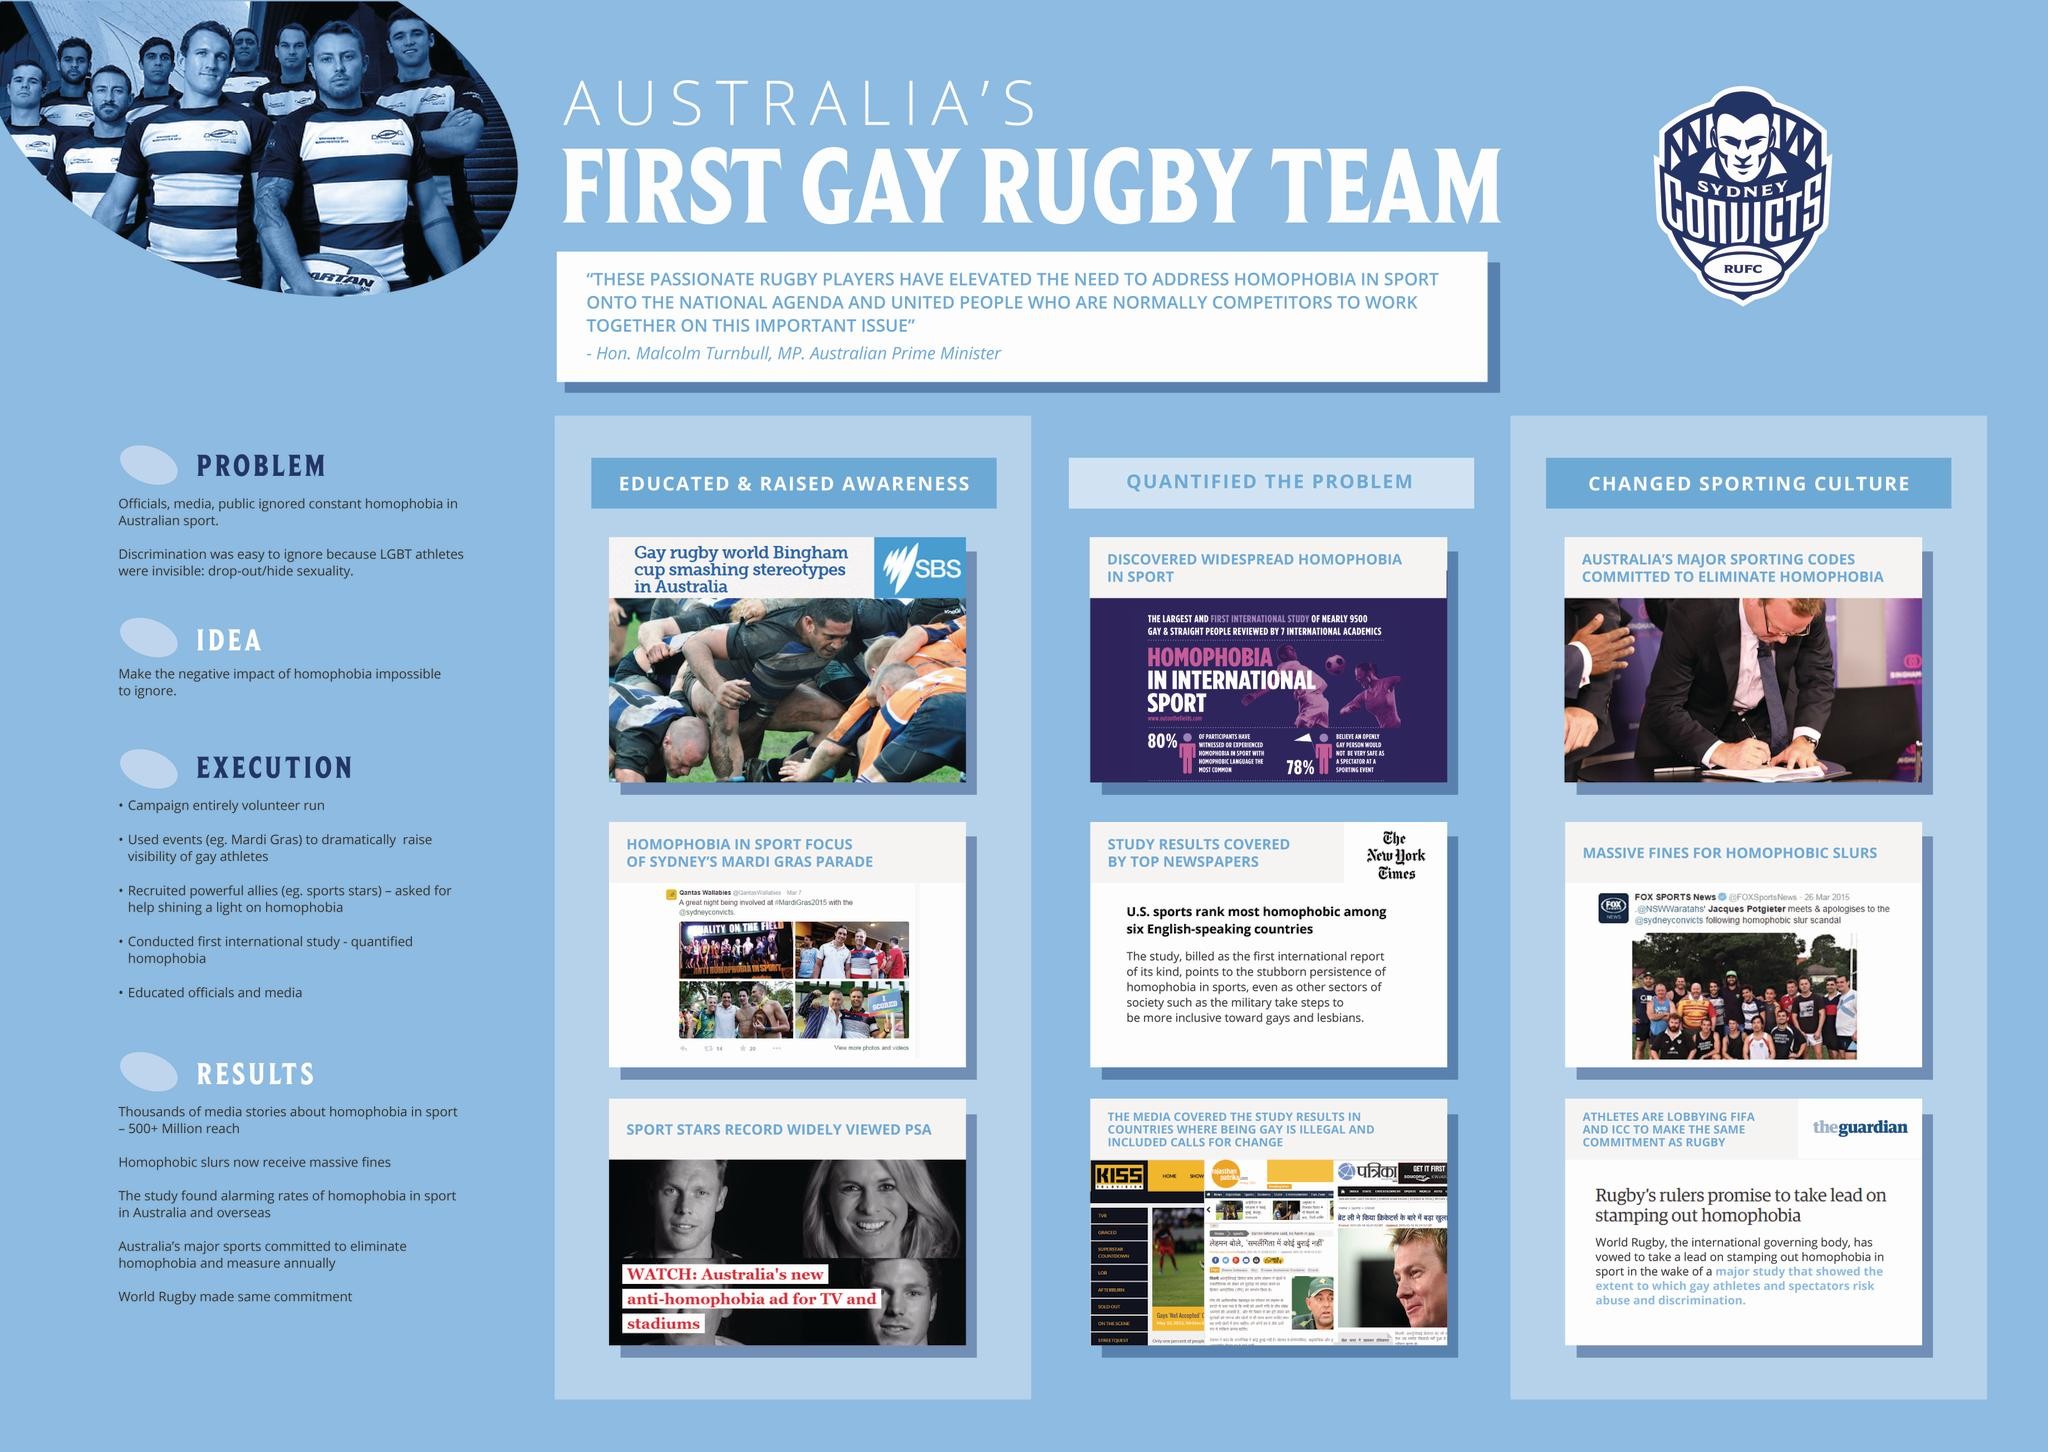 Tackling Homophobia in Sport